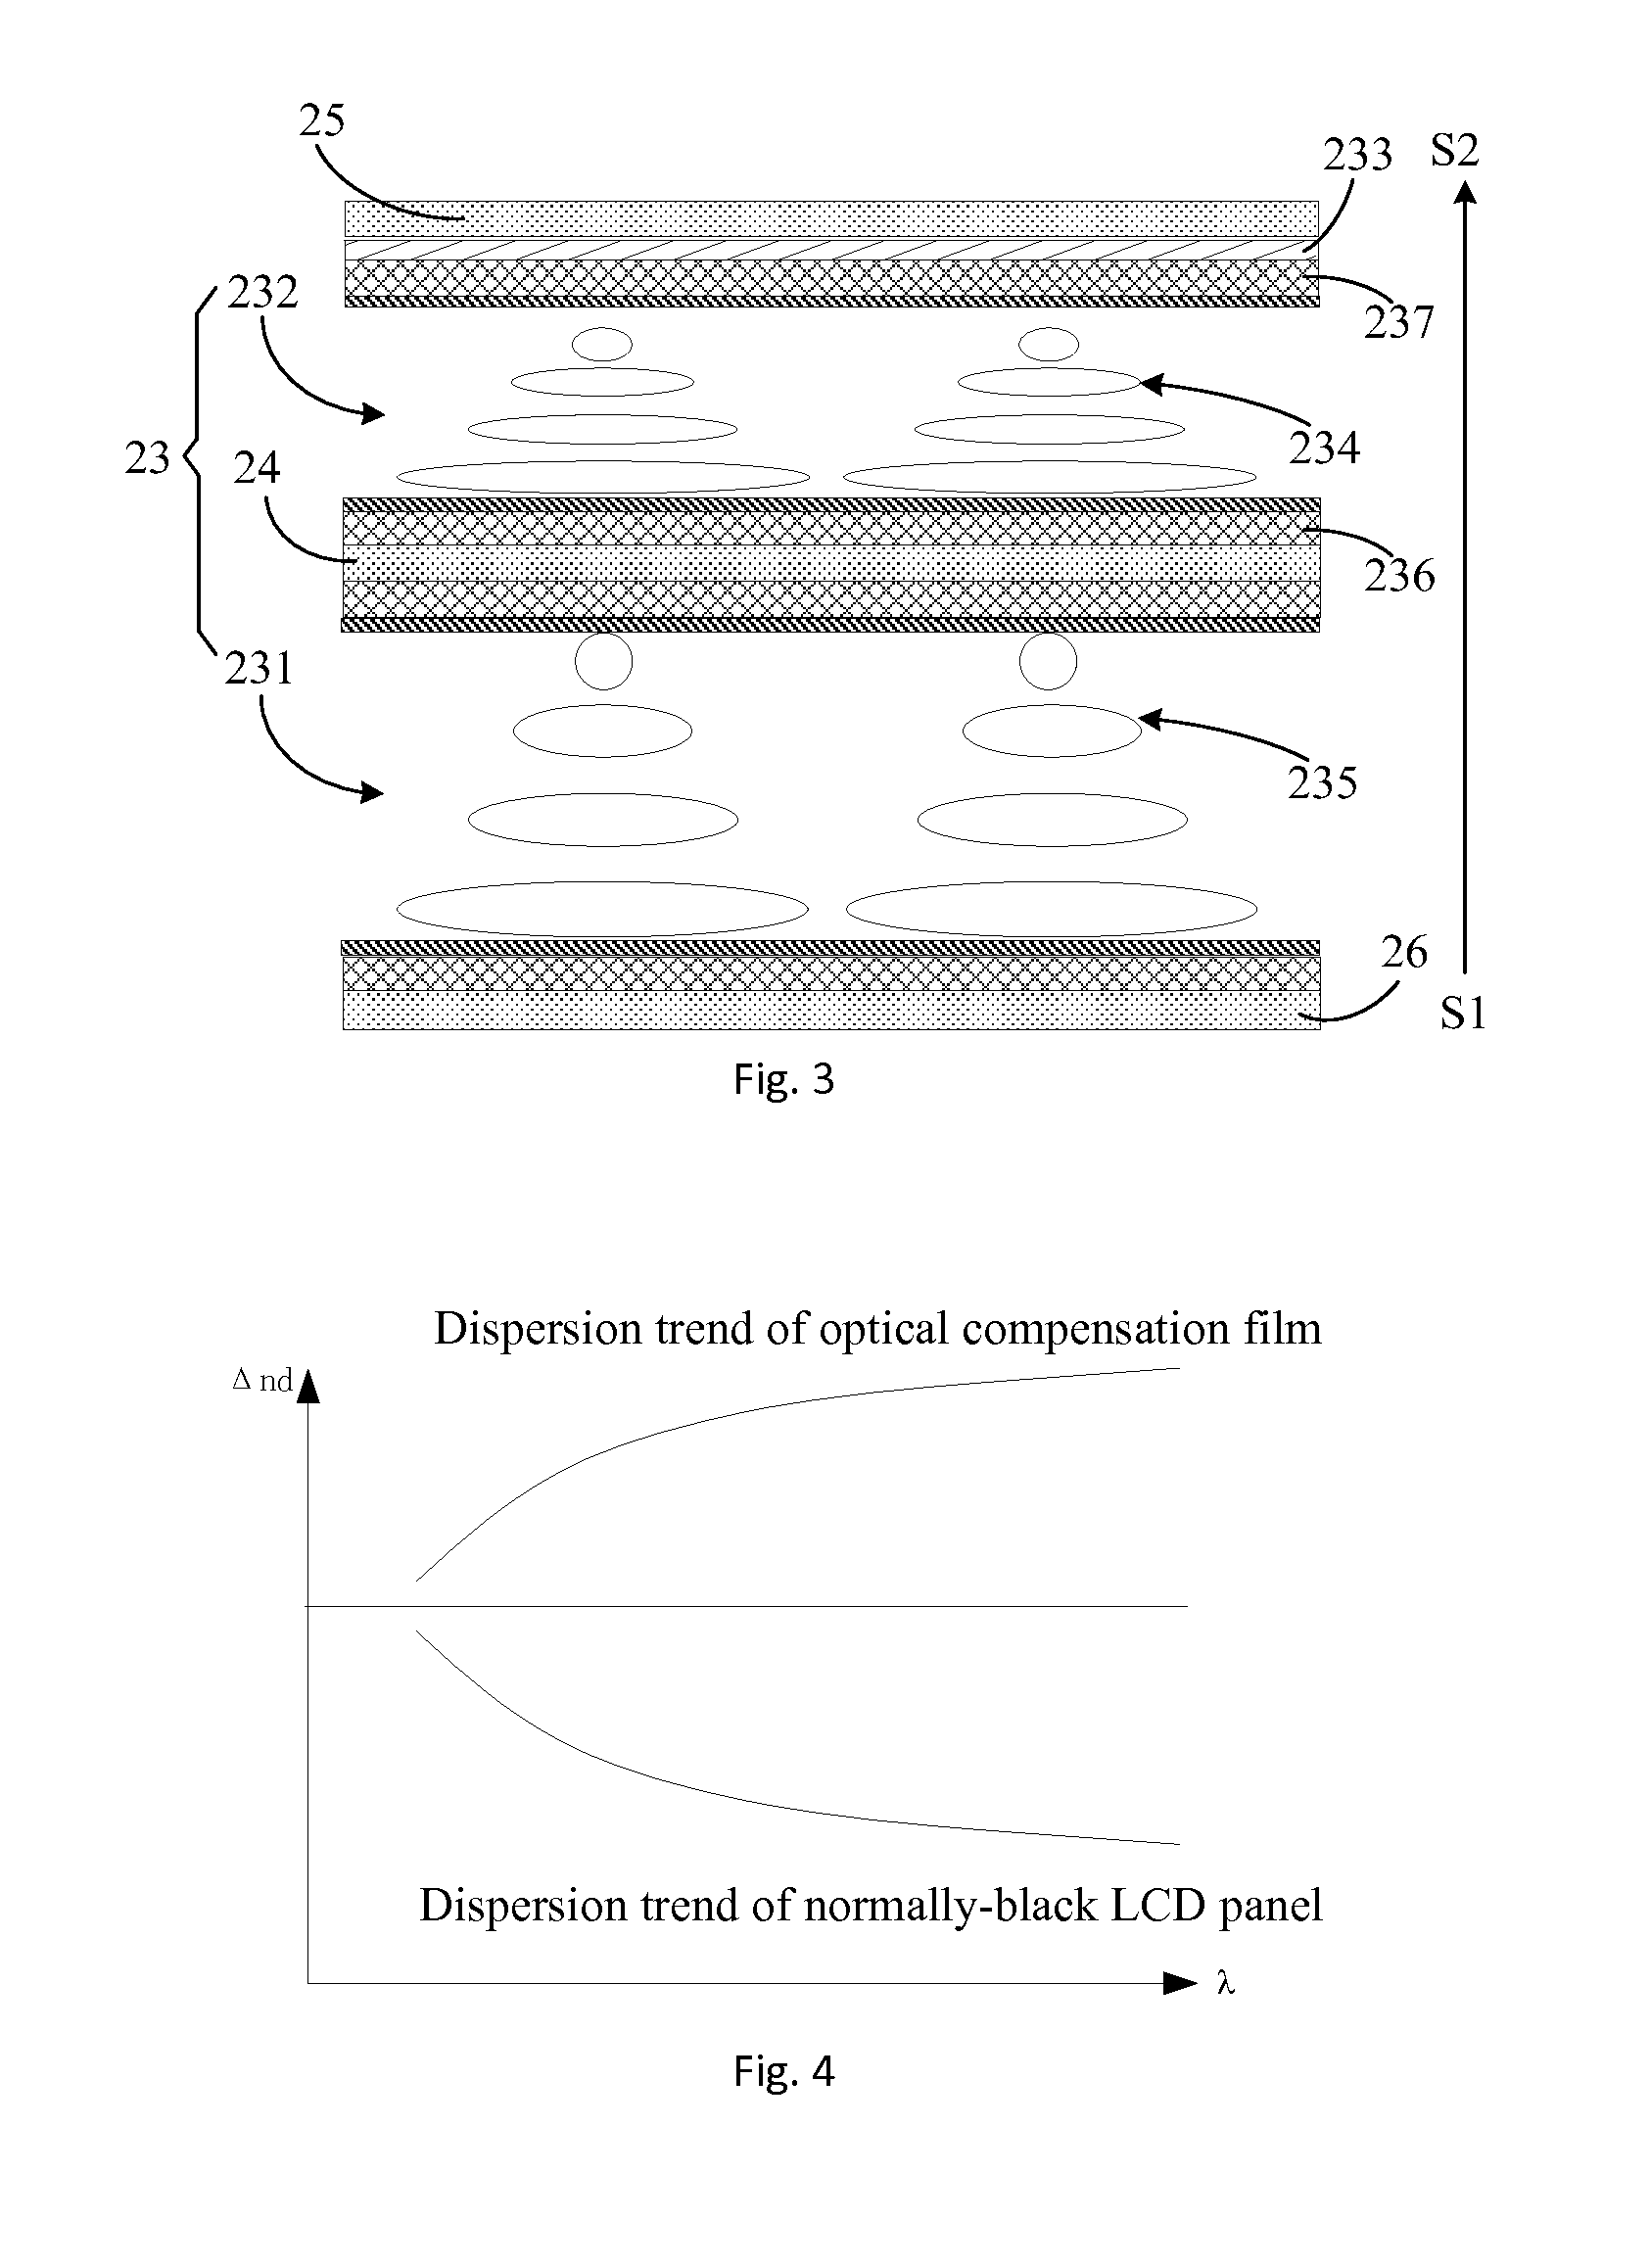 Shutter glasses and related 3D display system